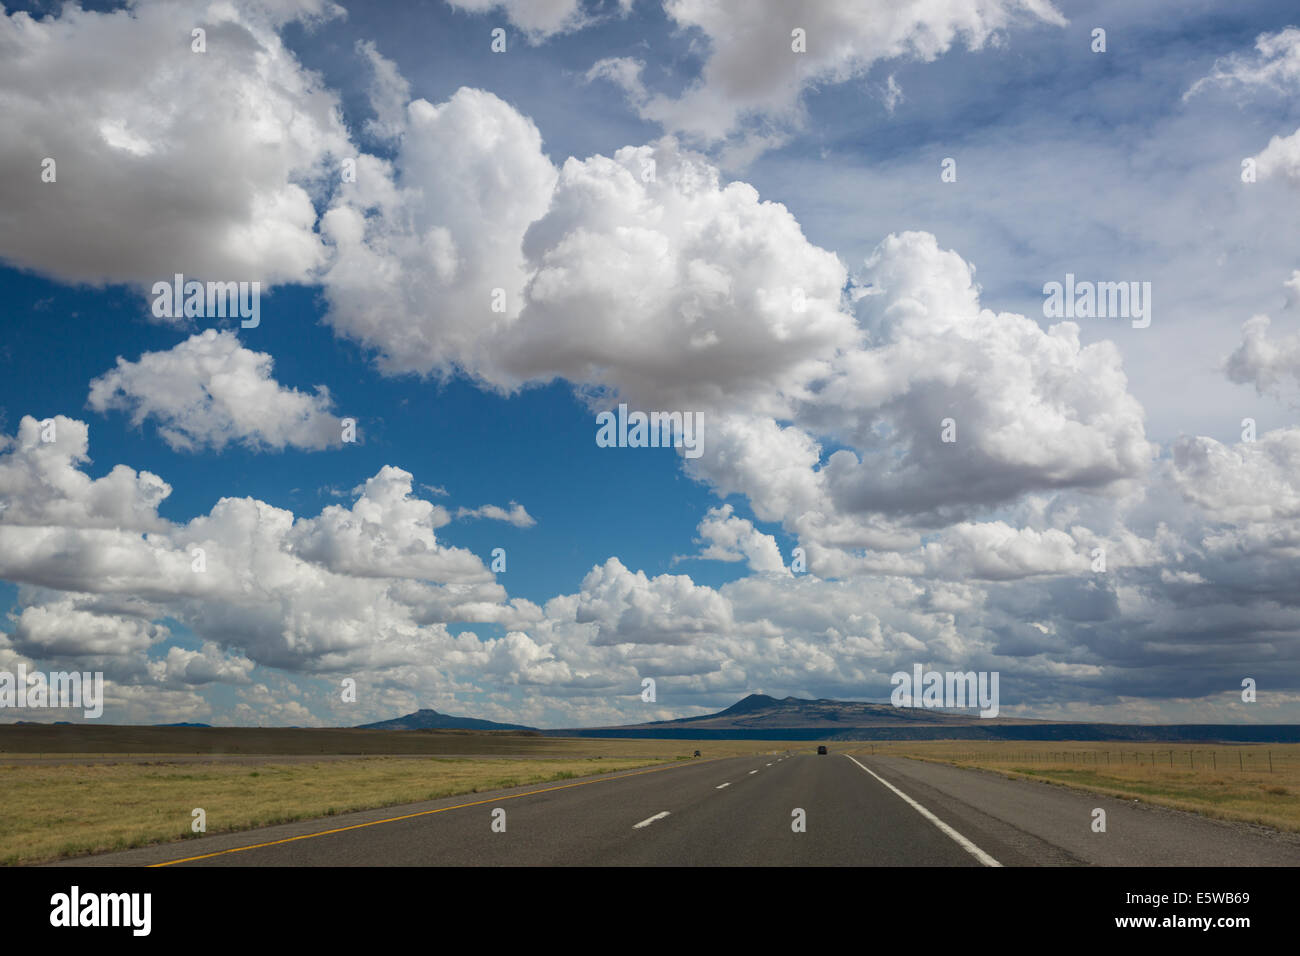 The beautiful arid and diverse desert landscape of New Mexico with mountains, hills, plains and lonely roads. Stock Photo